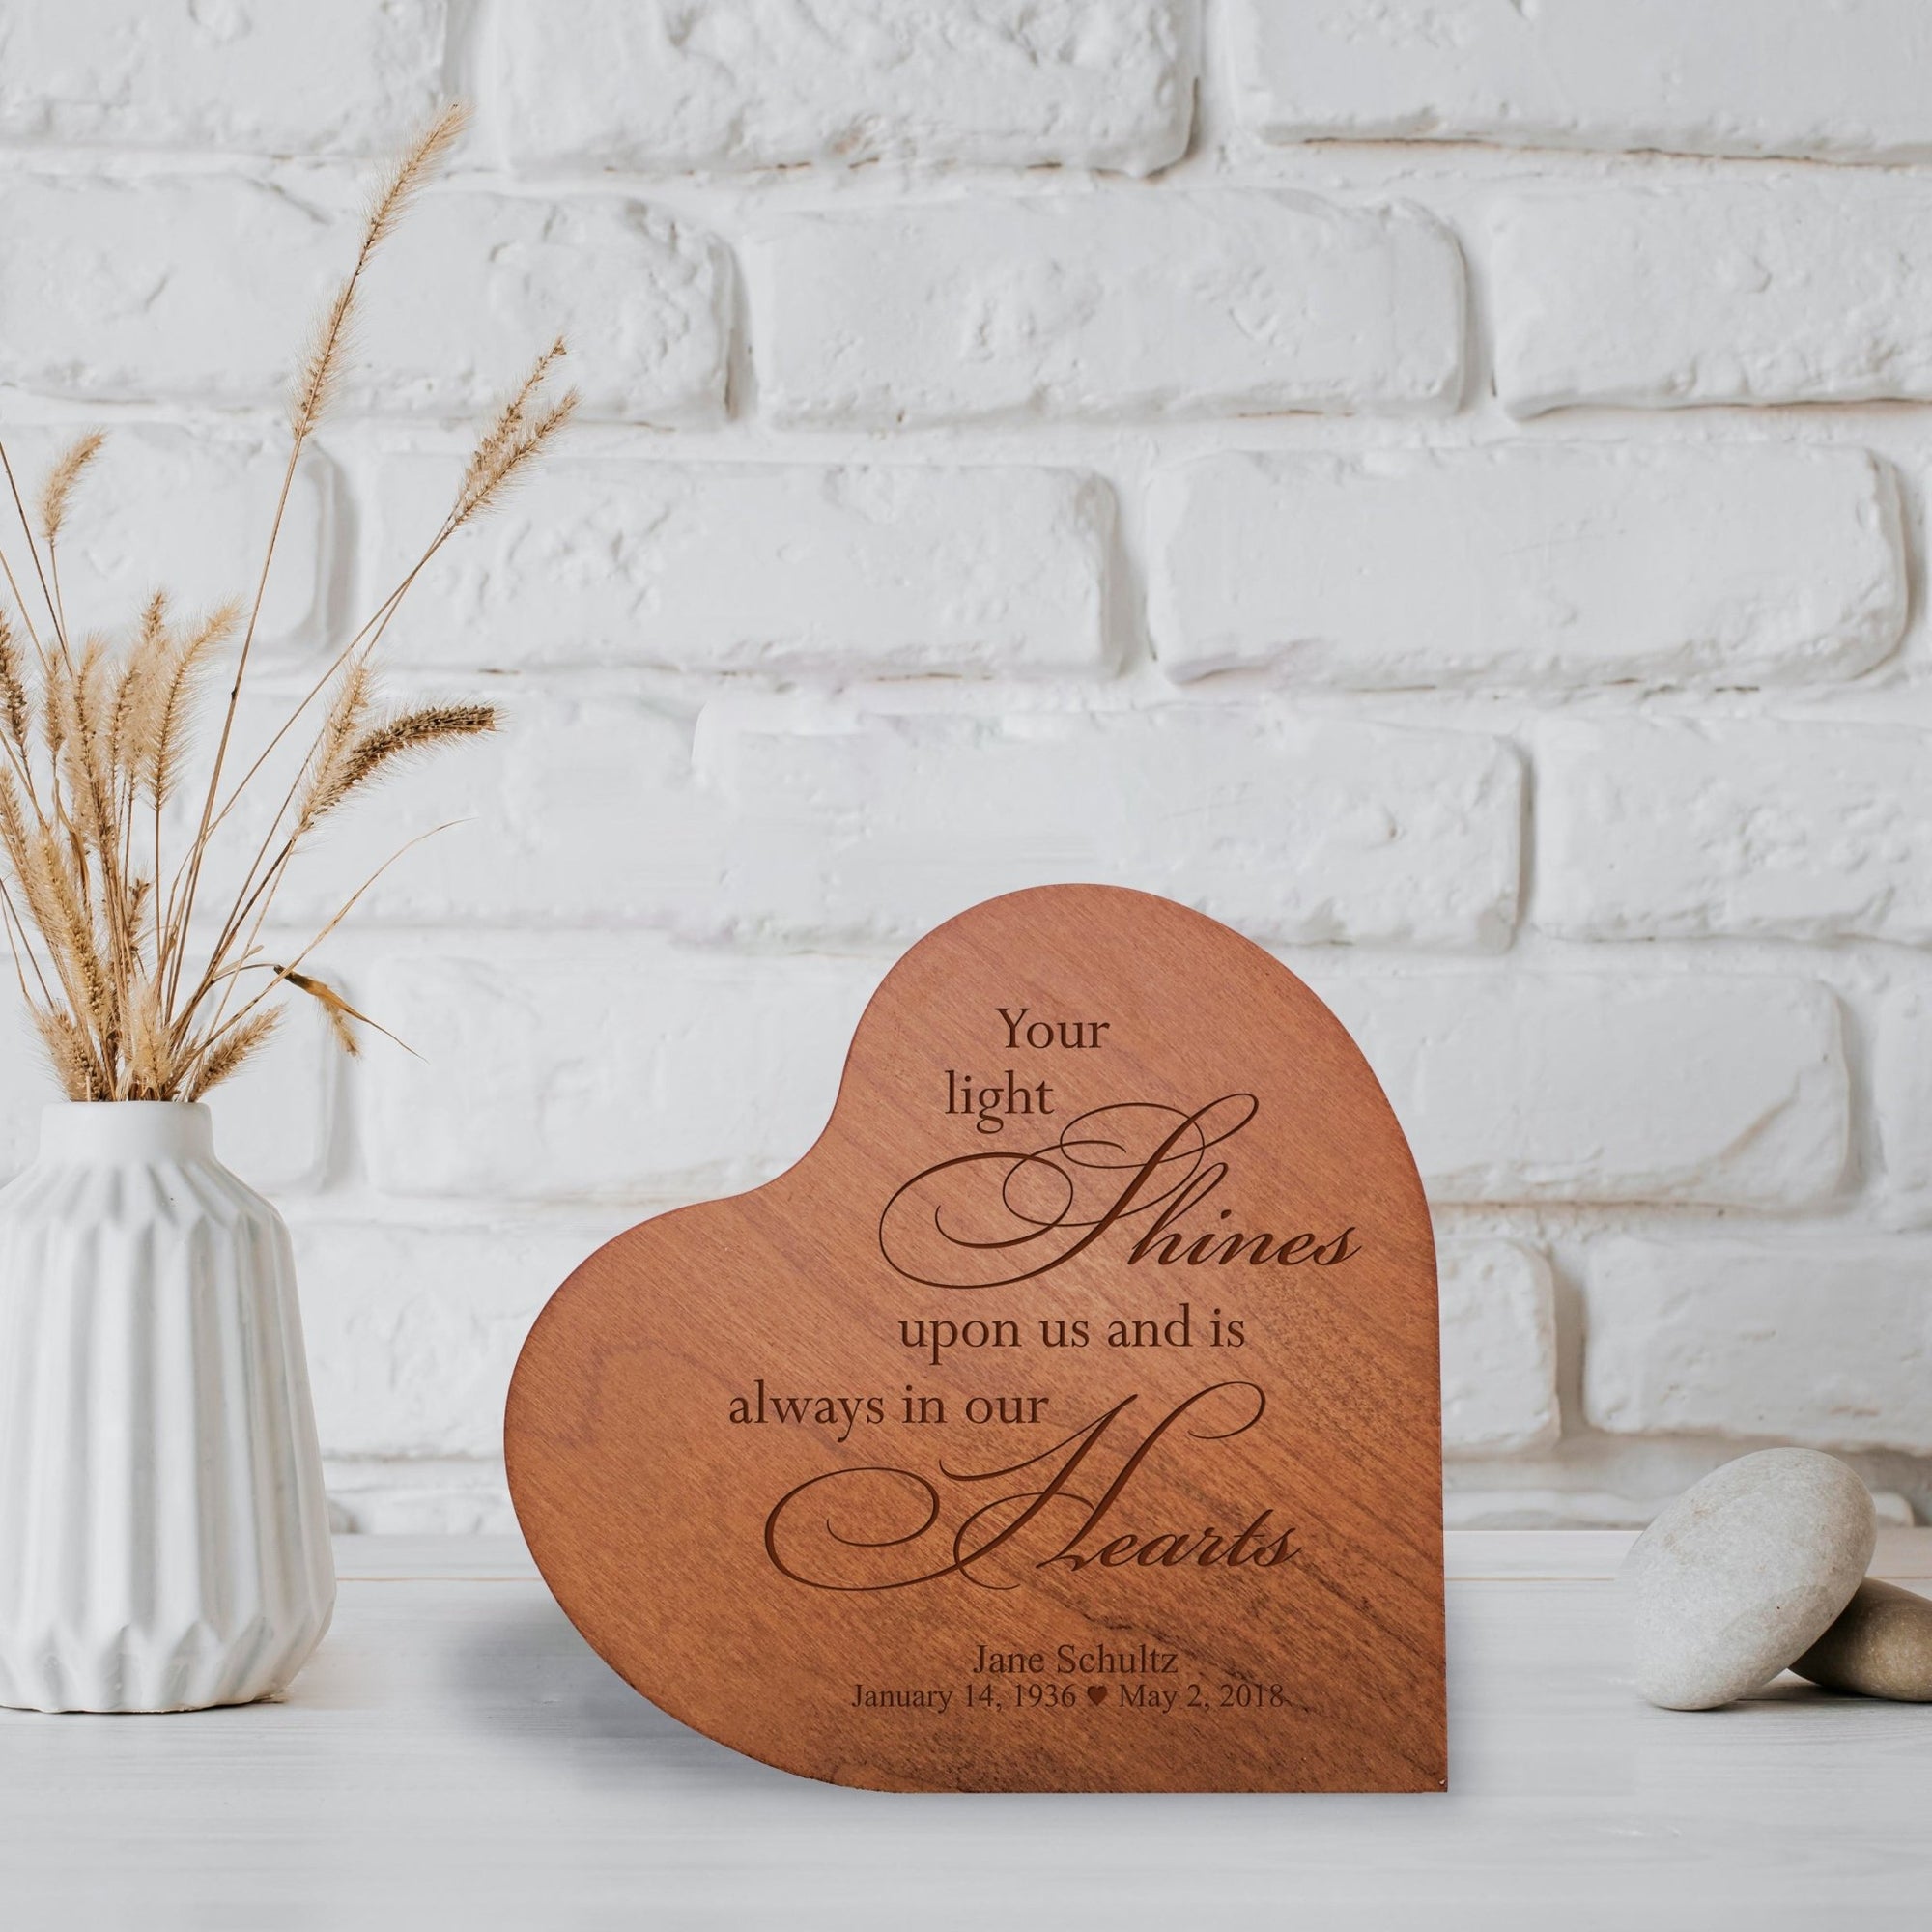 Personalized Heart Block Memorial Sympathy Gift for Loss of Loved One - LifeSong Milestones